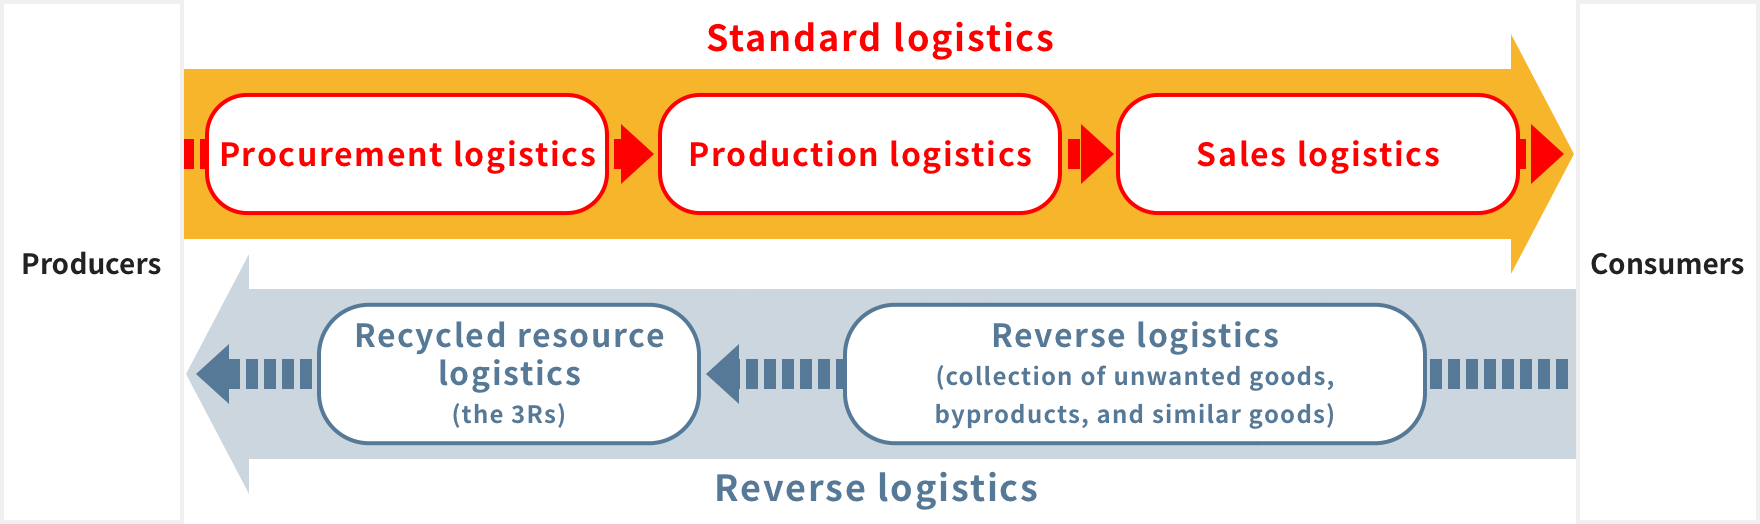 Supporting the Promotion of the 3Rs through Reverse Logistics